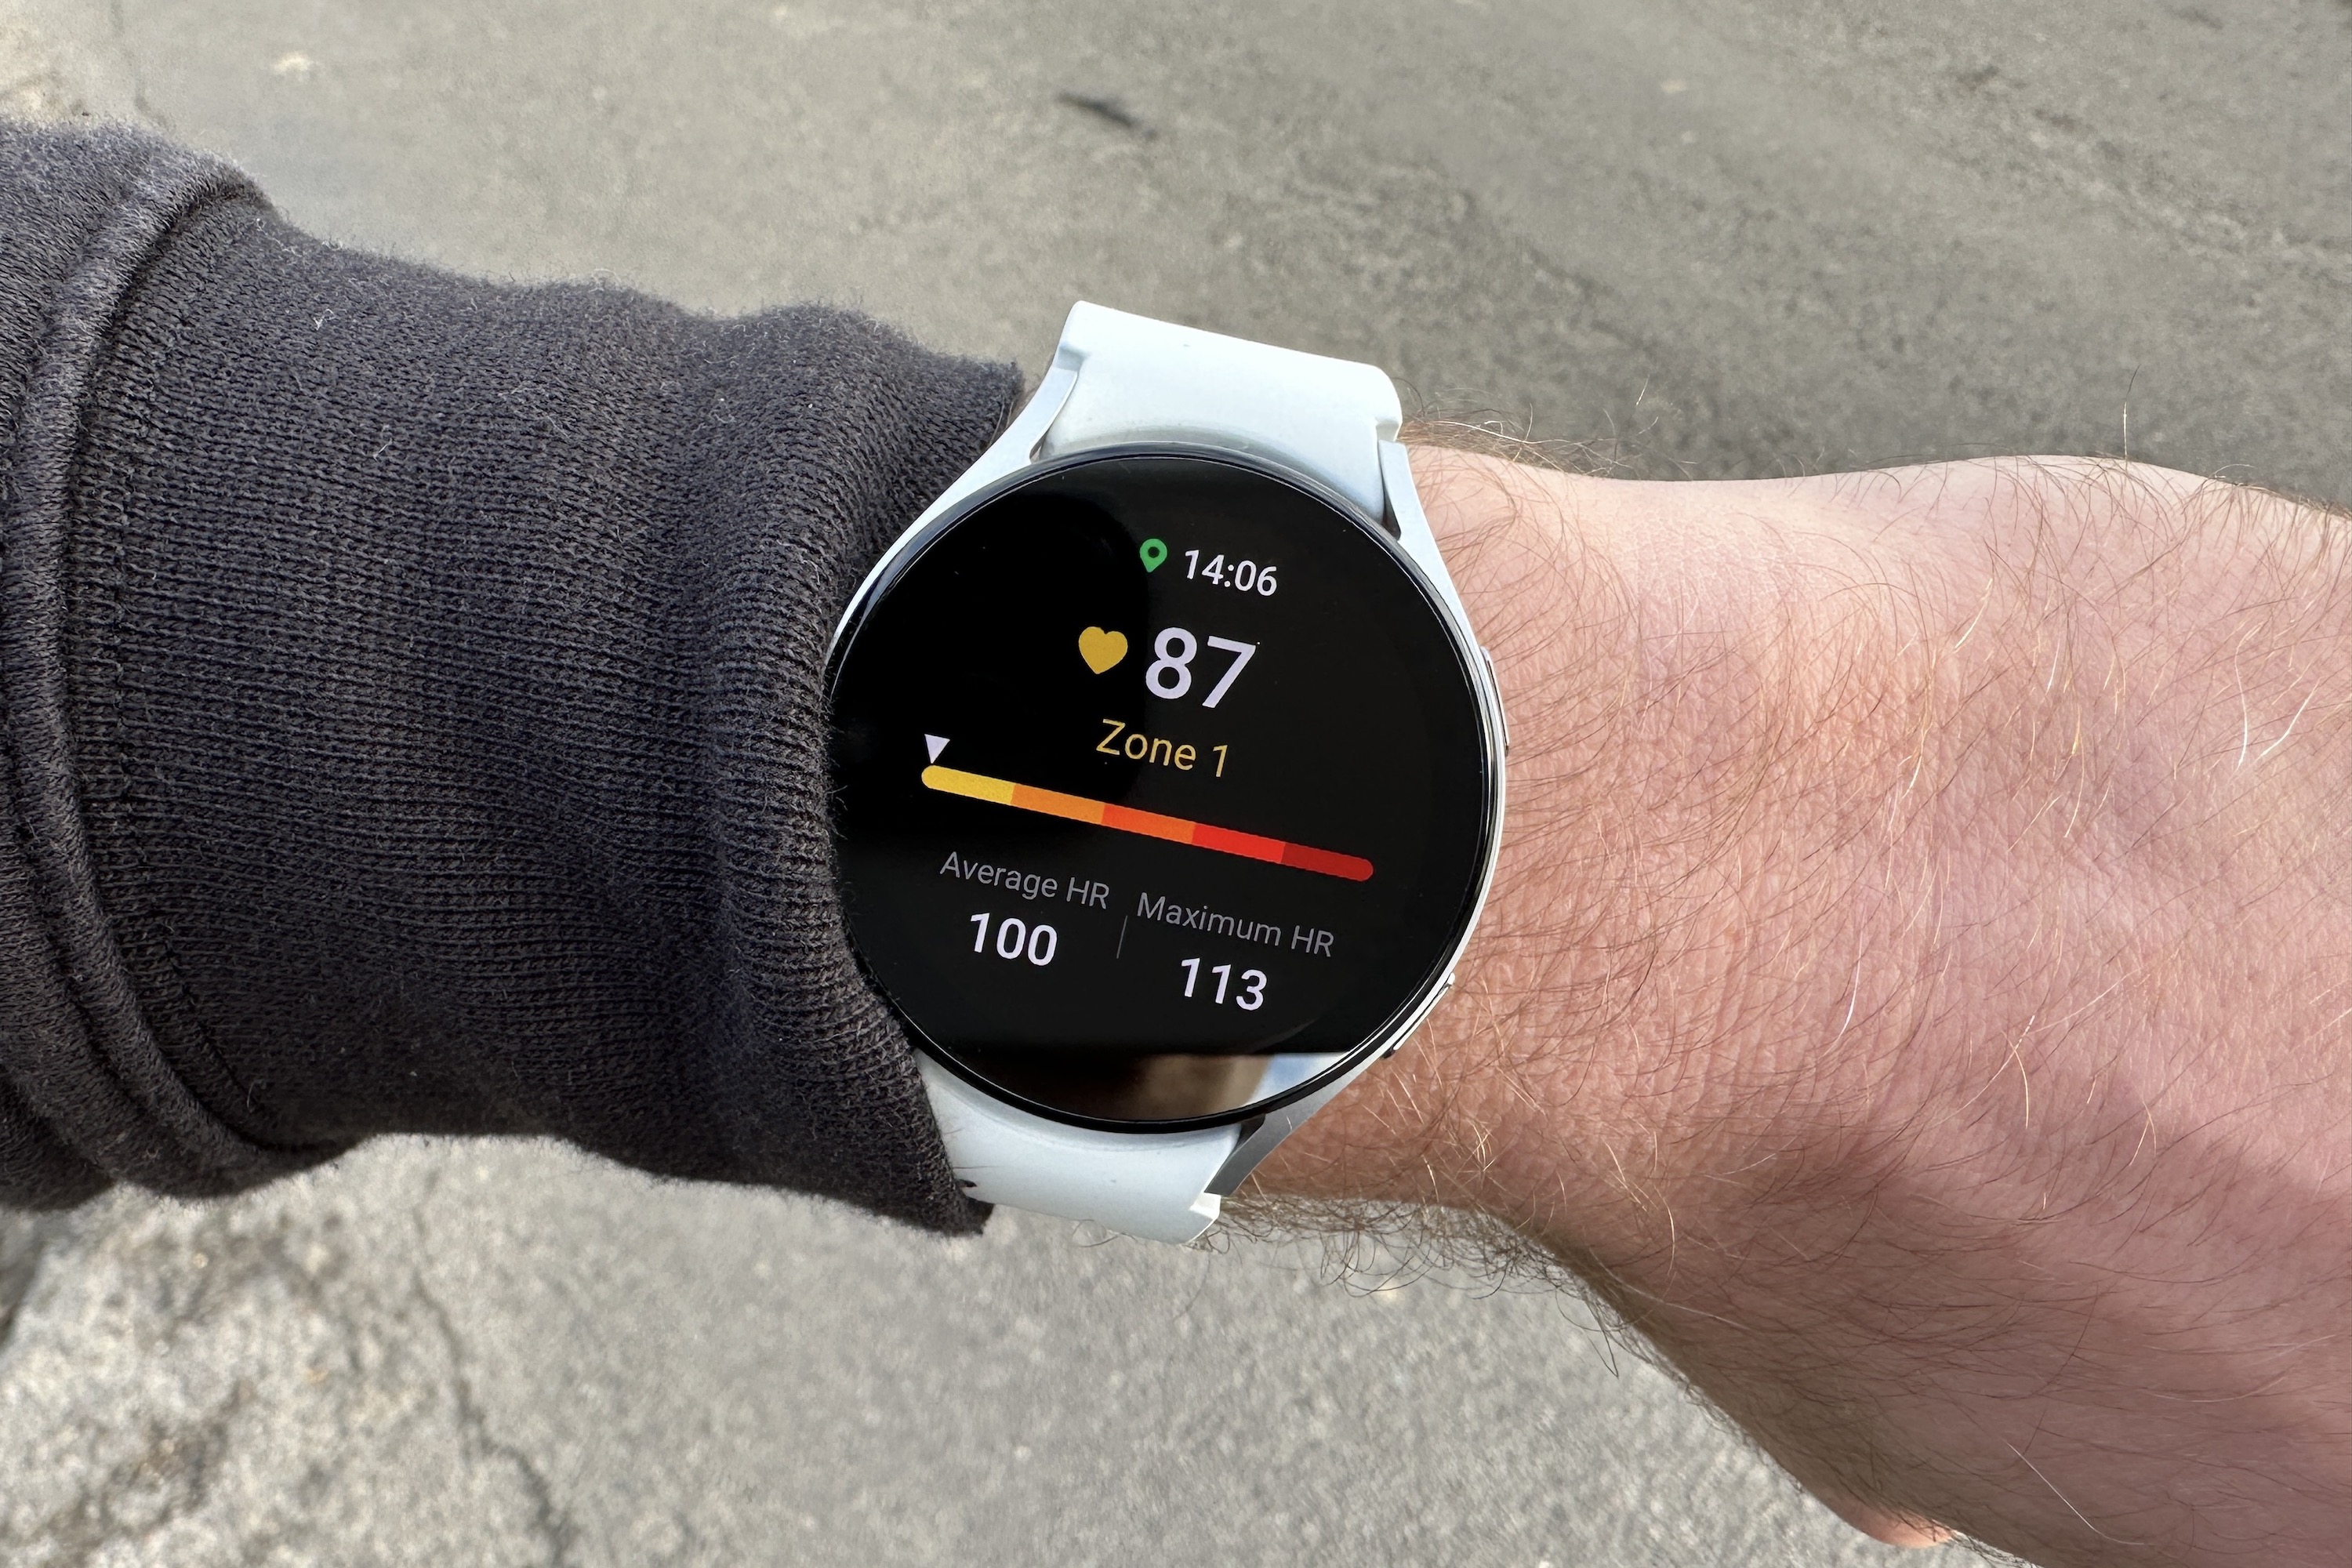 Data from a workout showing on the screen of the Samsung Galaxy Watch 5.